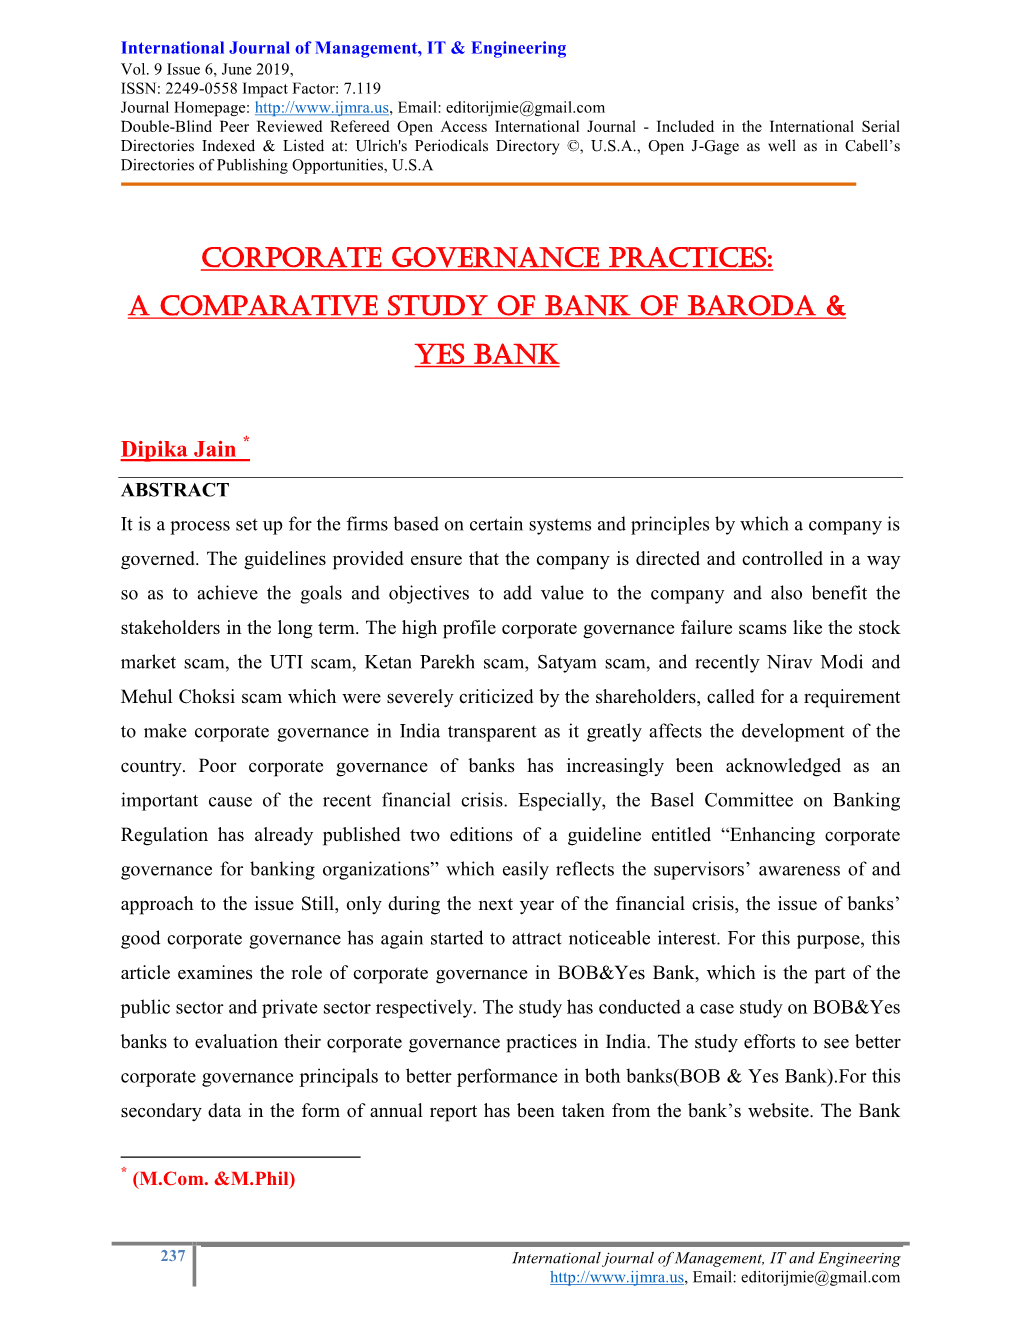 Corporate Governance Practices: a Comparative Study of Bank of Baroda & Yes Bank